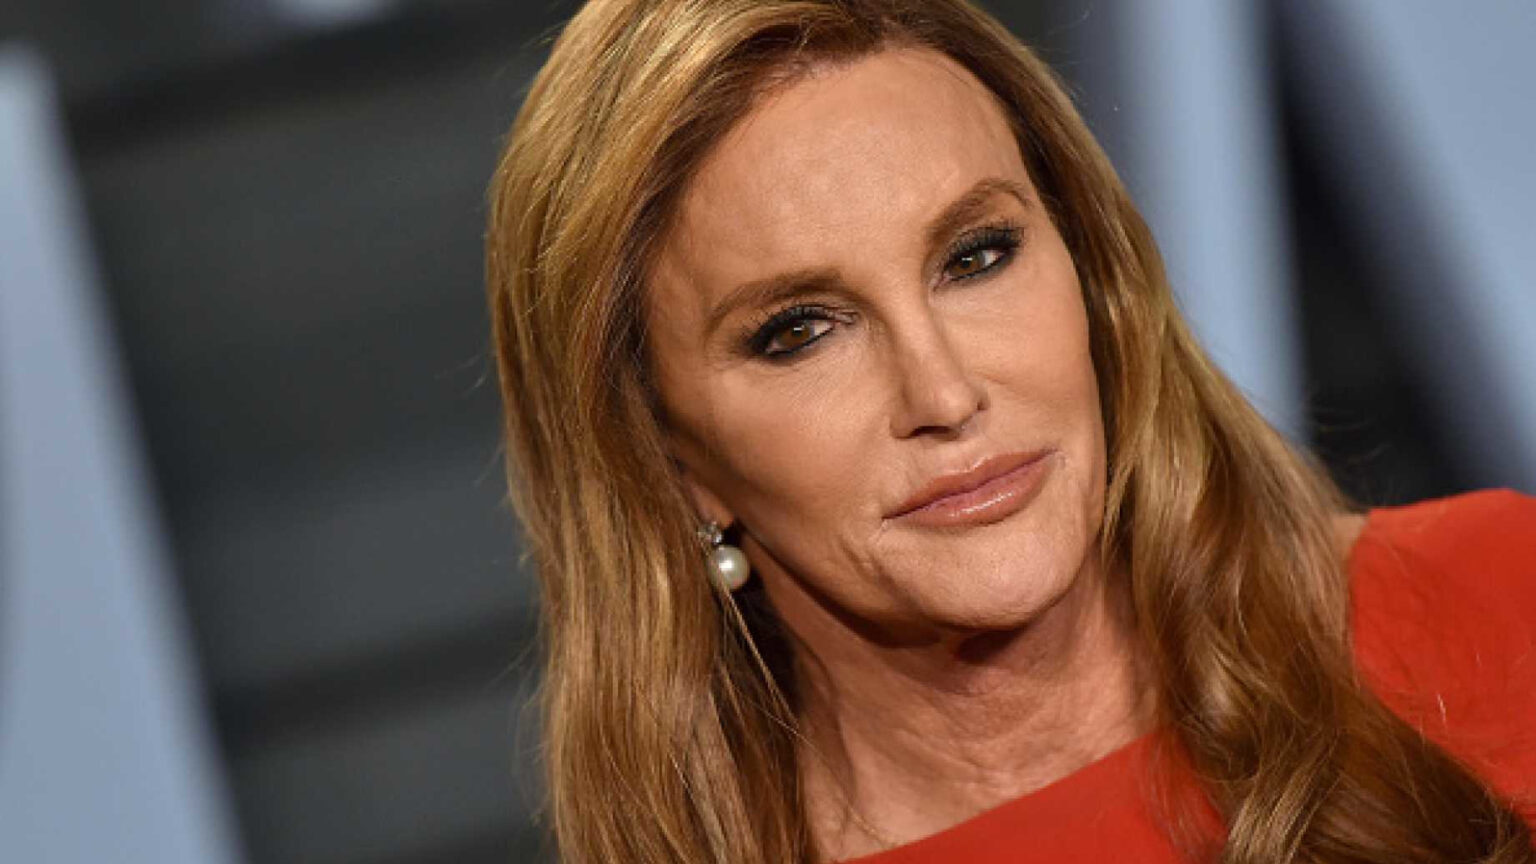 Is Caitlyn Jenner running for governor? Discover how Jenner can use her net worth to come out on top during CA's next gubernatorial race or the recall.